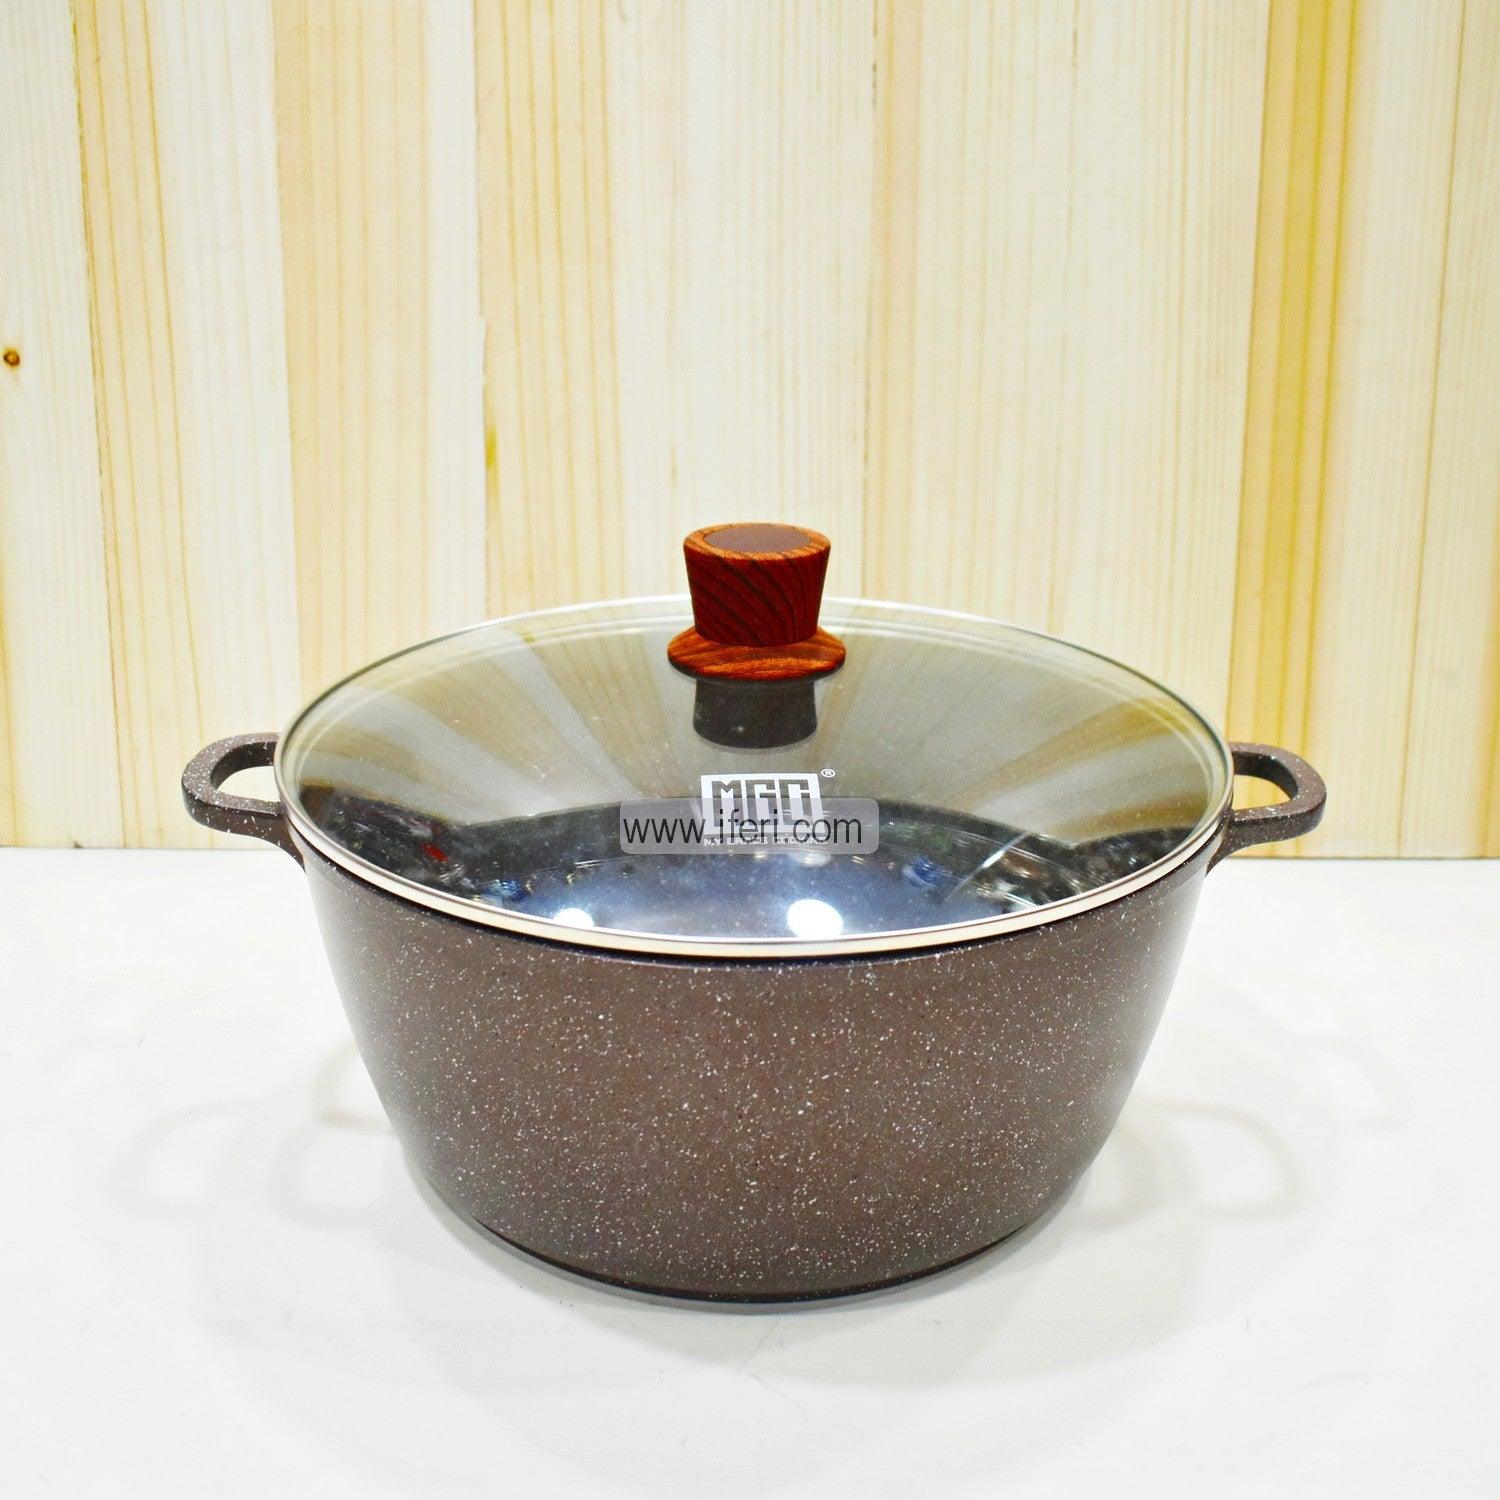 32 cm MGC Non-stick Marble Coated Cookware with Lid RY0574 Price in Bangladesh - iferi.com